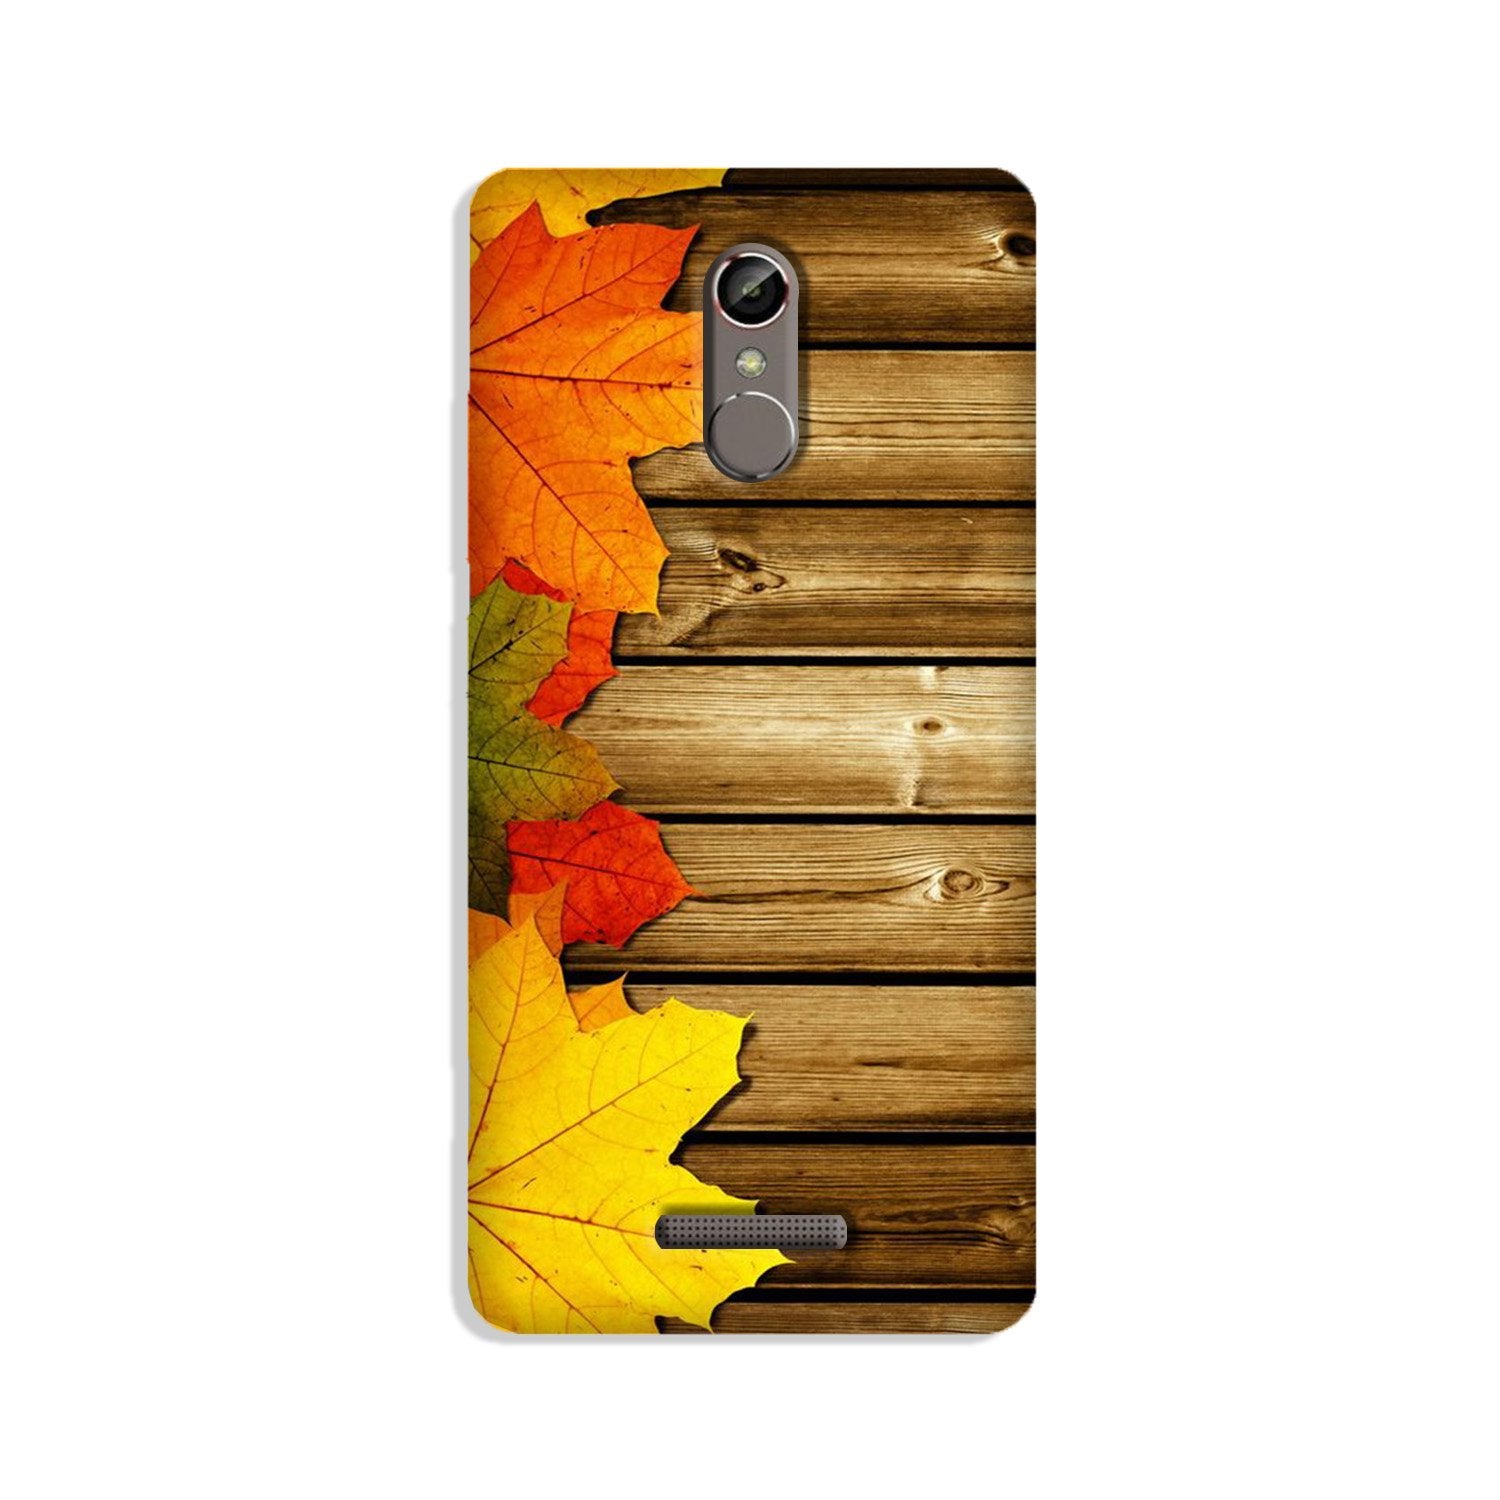 Wooden look3 Case for Gionee S6s